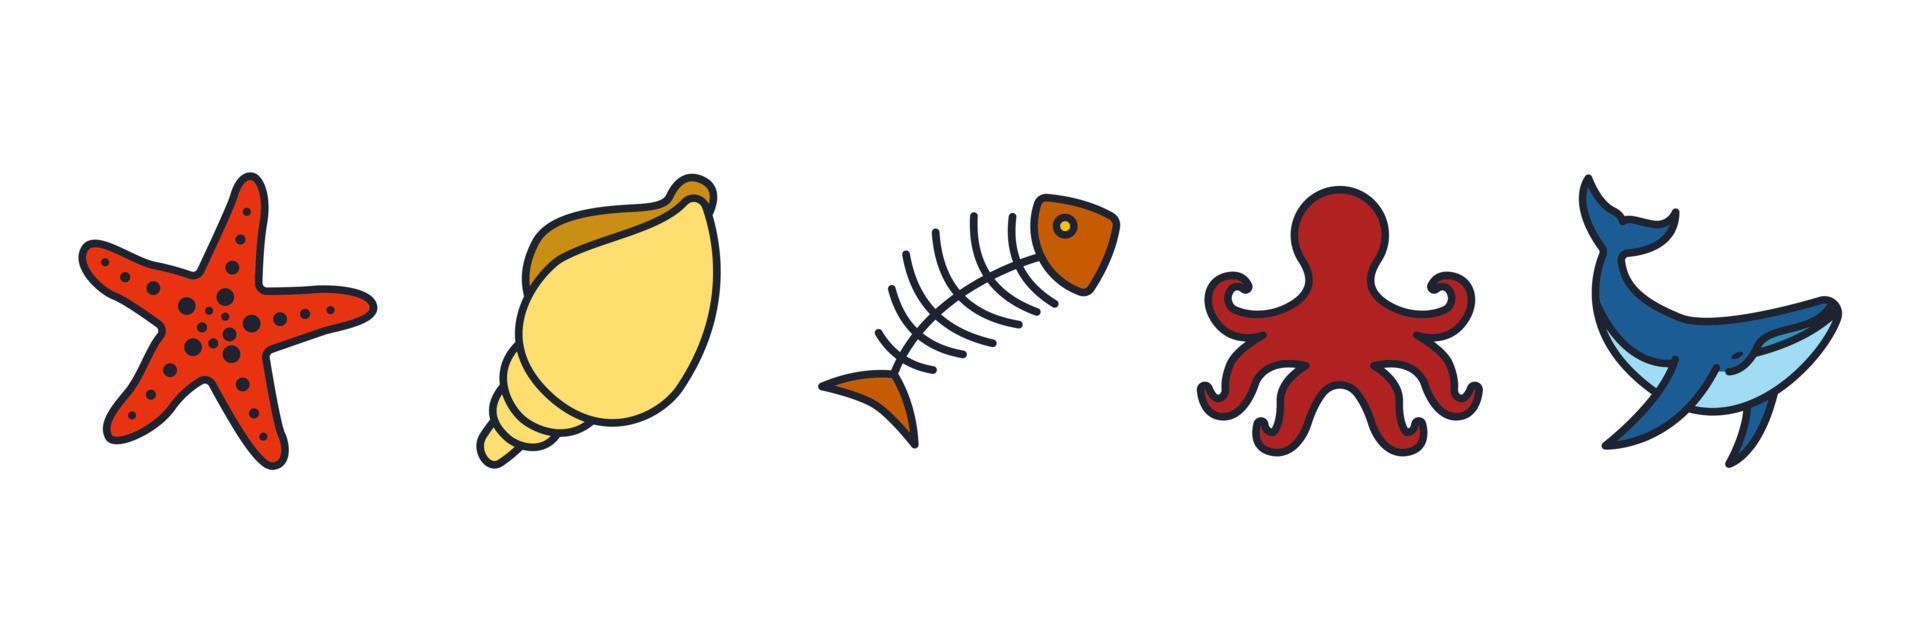 fish and seafood set icon symbol template for graphic and web design collection logo vector illustration